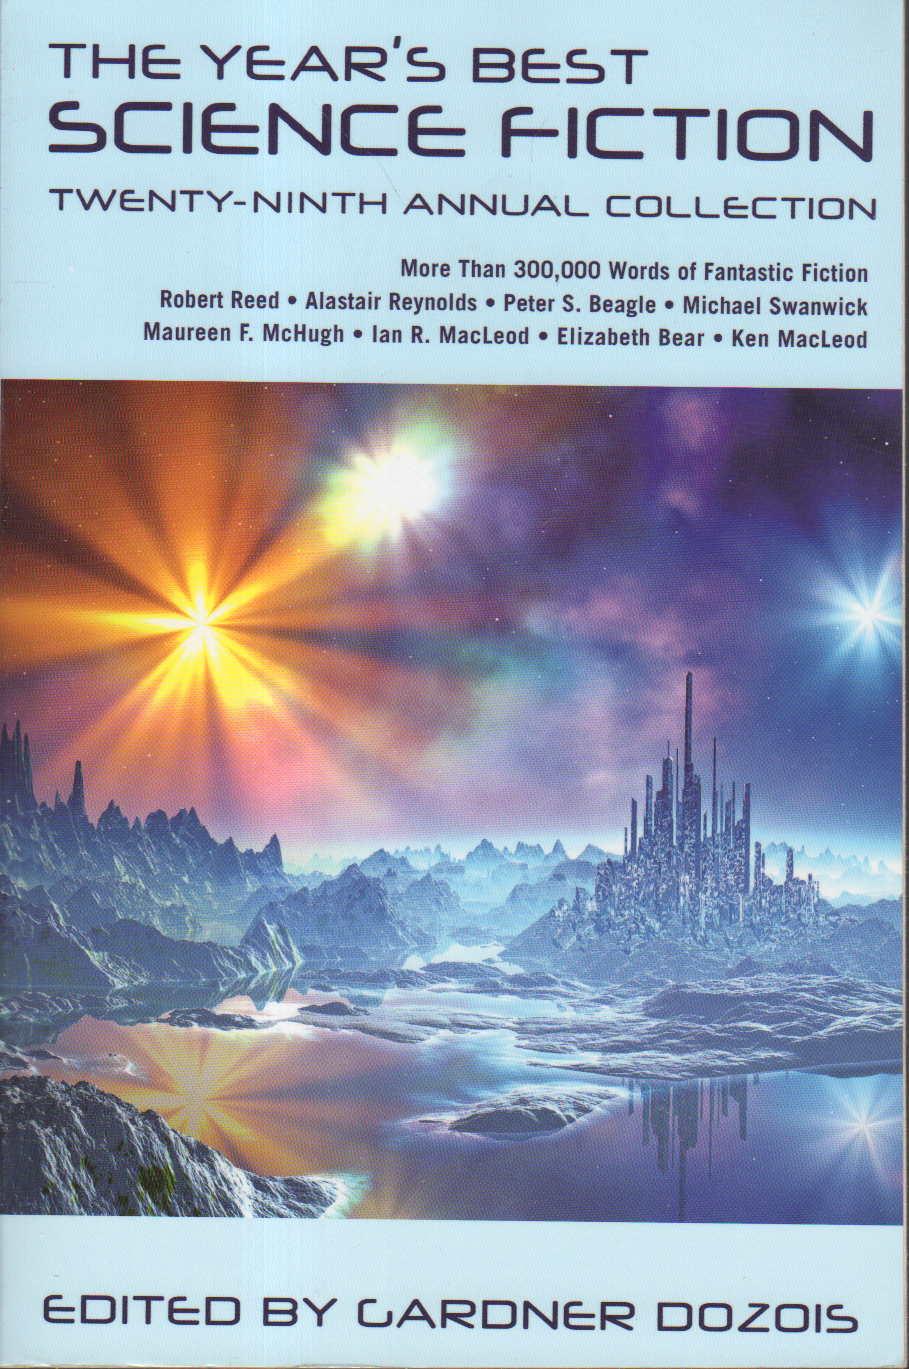 THE YEAR'S BEST SCIENCE FICTION: Twenty-ninth (29th) Annual Collection. - Anthology, signed] Dozois, Gardner, editor. Michael Swanwick, Elizabeth Bear, Karl Shroeder, Pat Cadigan and Catherynne M. Valente, signed; Peter Beagle, Alastair Reynolds, John Barnes and others, contributors.